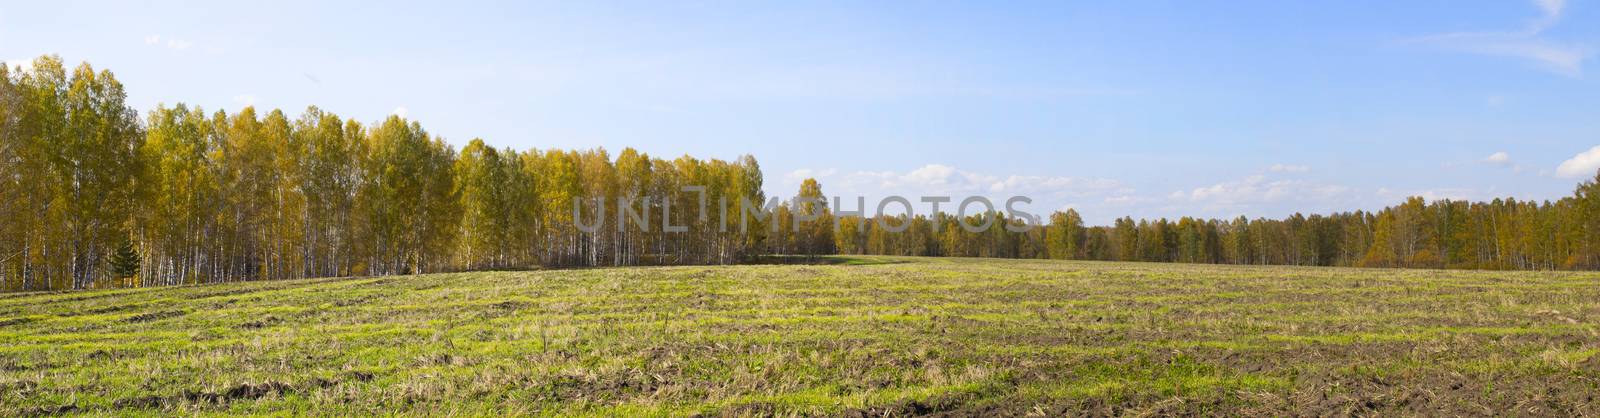 Autumn nature in panorama. Autumn yellow forest and field. by AnatoliiFoto